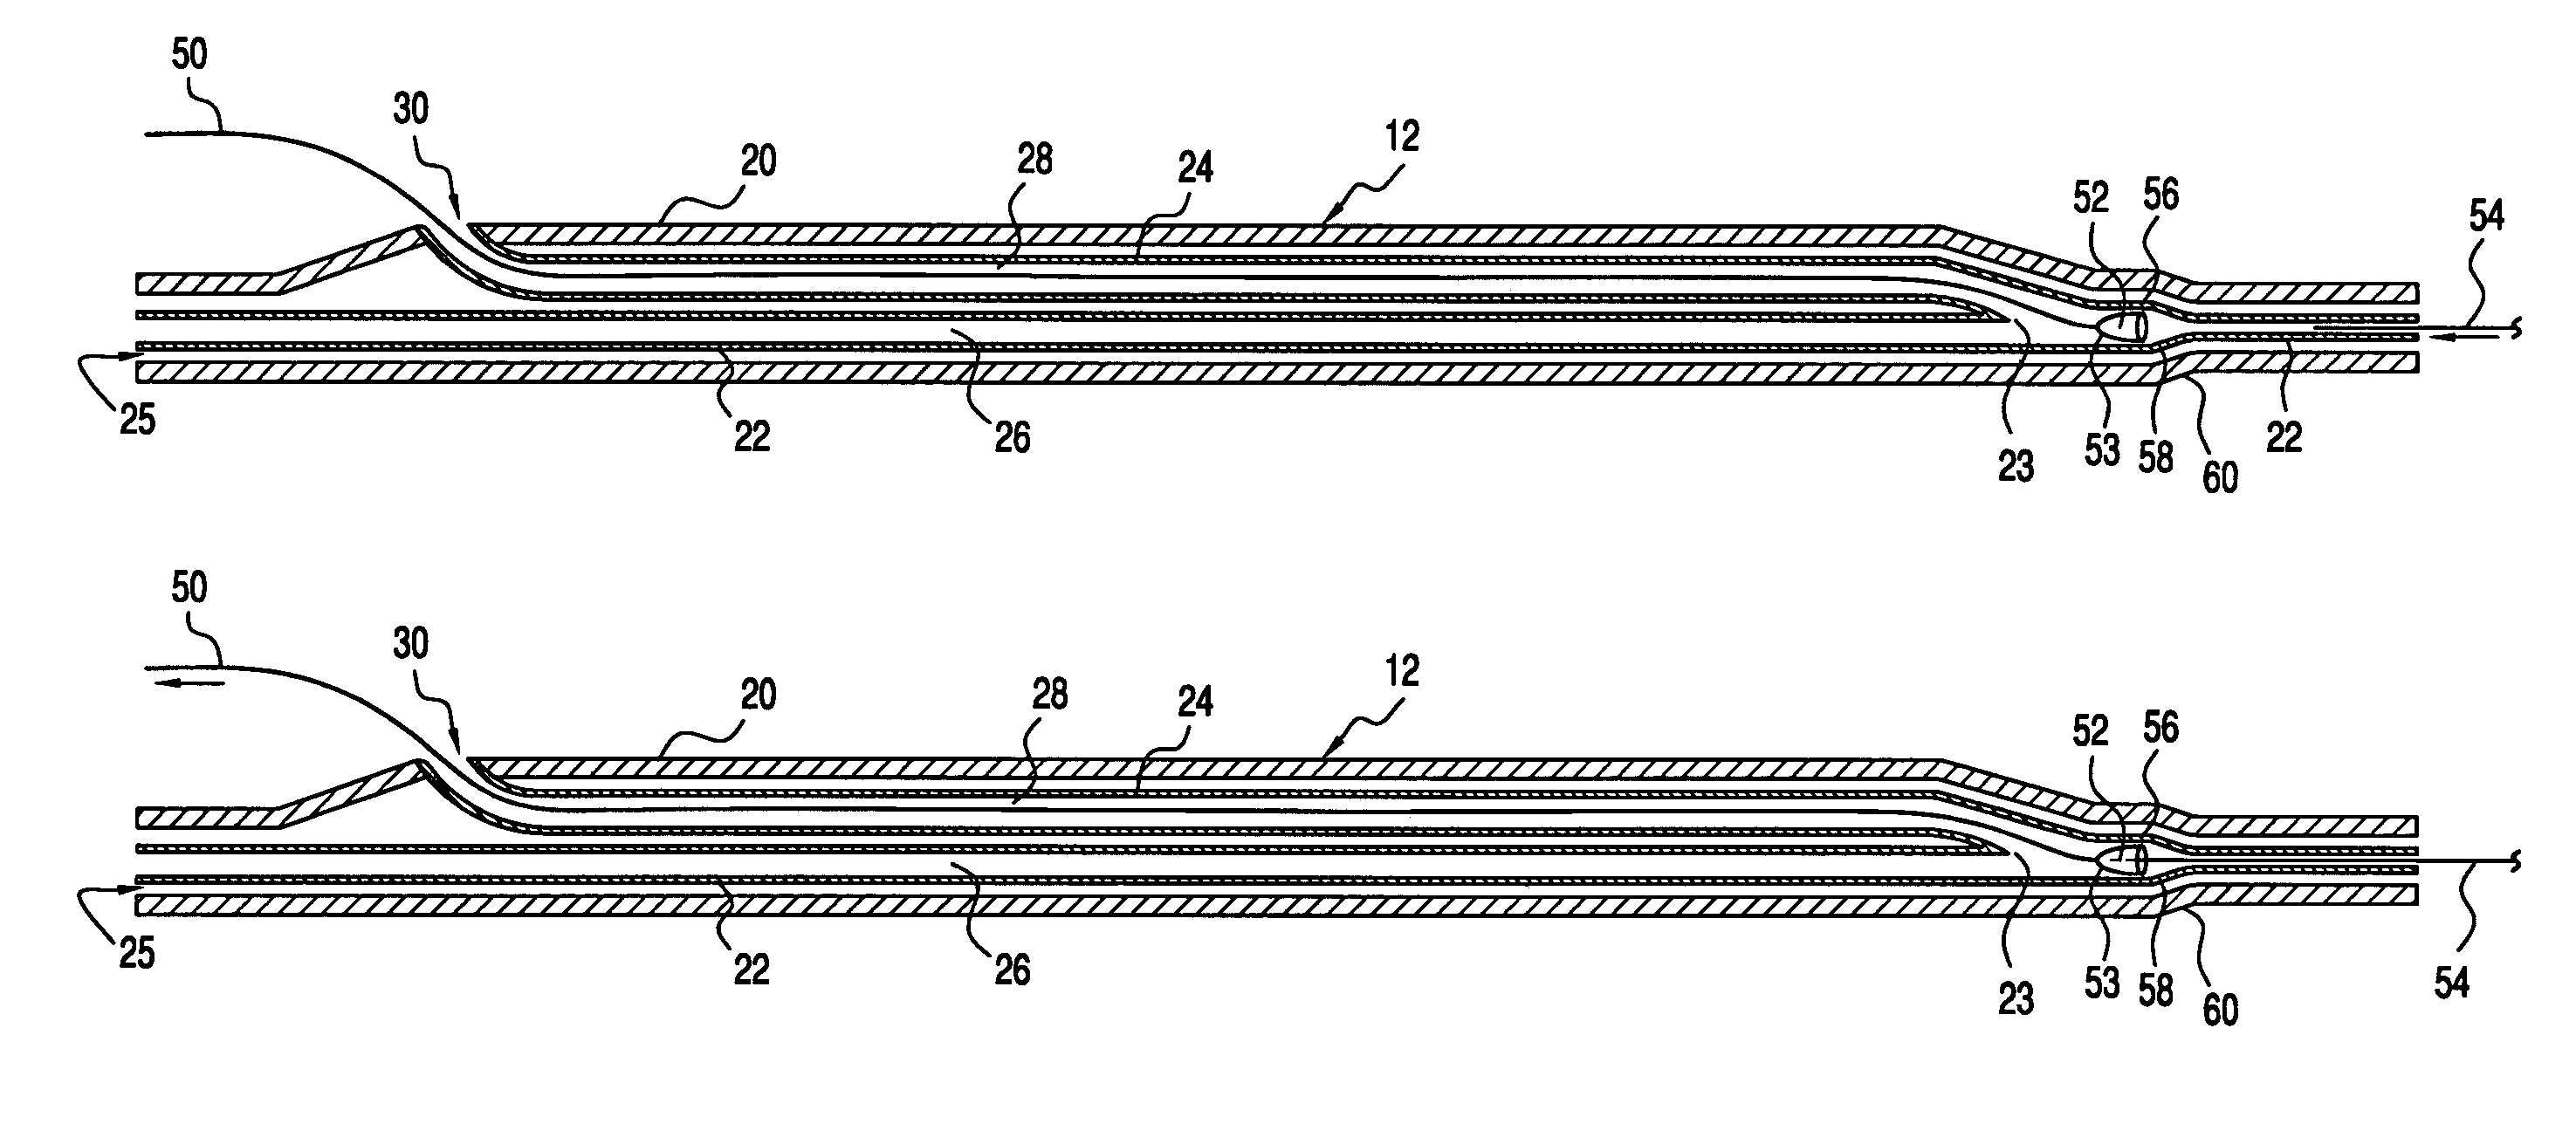 Catheter having an auxiliary lumen for use with a functional measurement wire